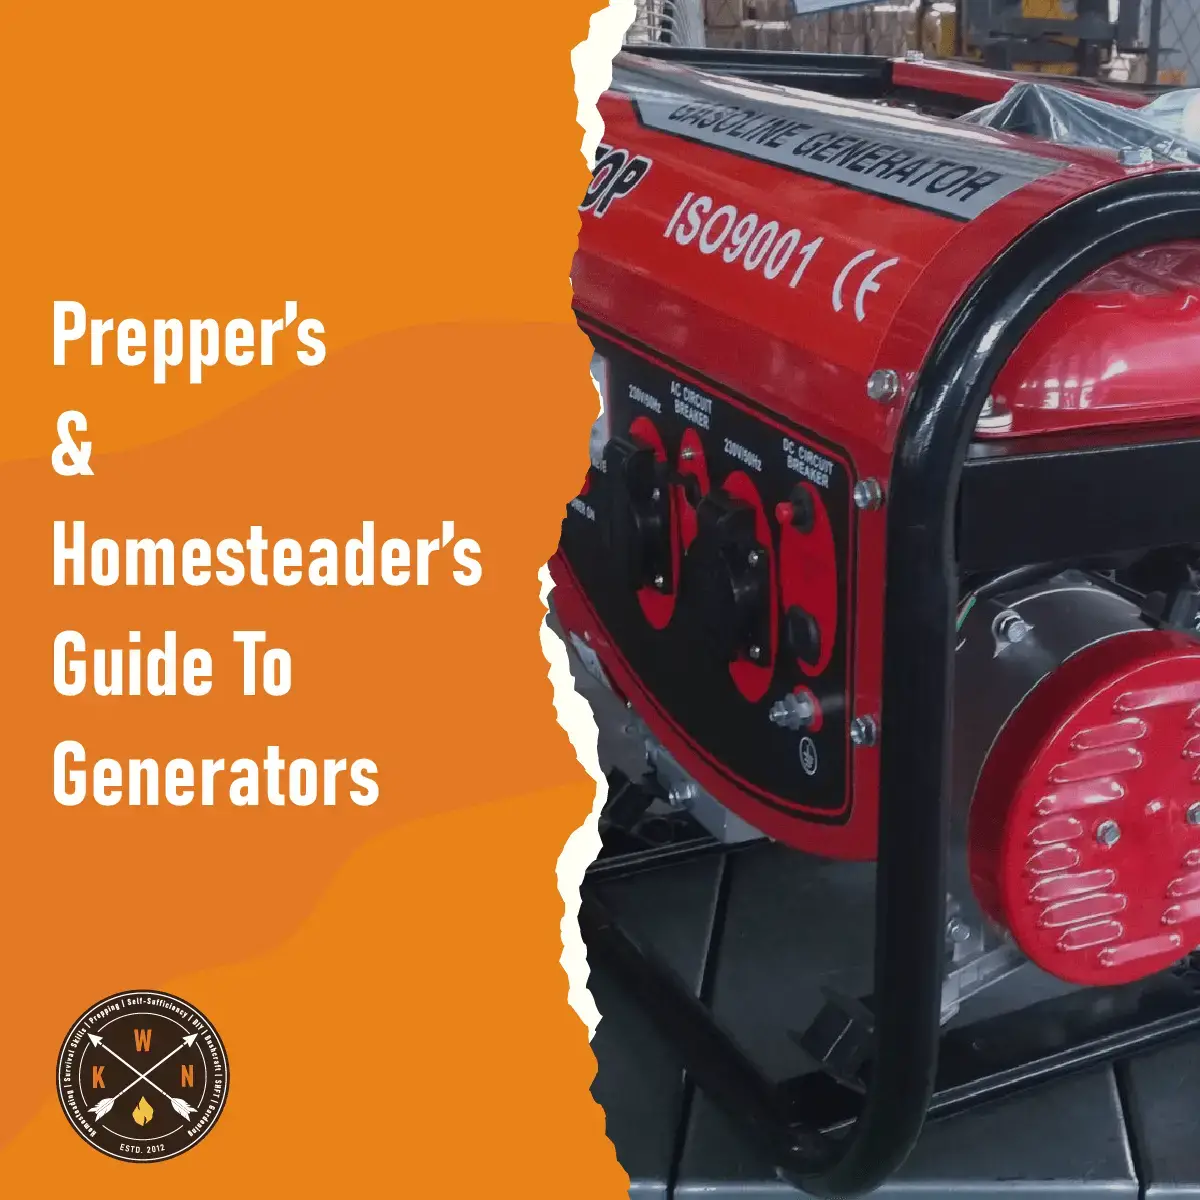 Preppers Homesteaders Guide To Generators for facebook